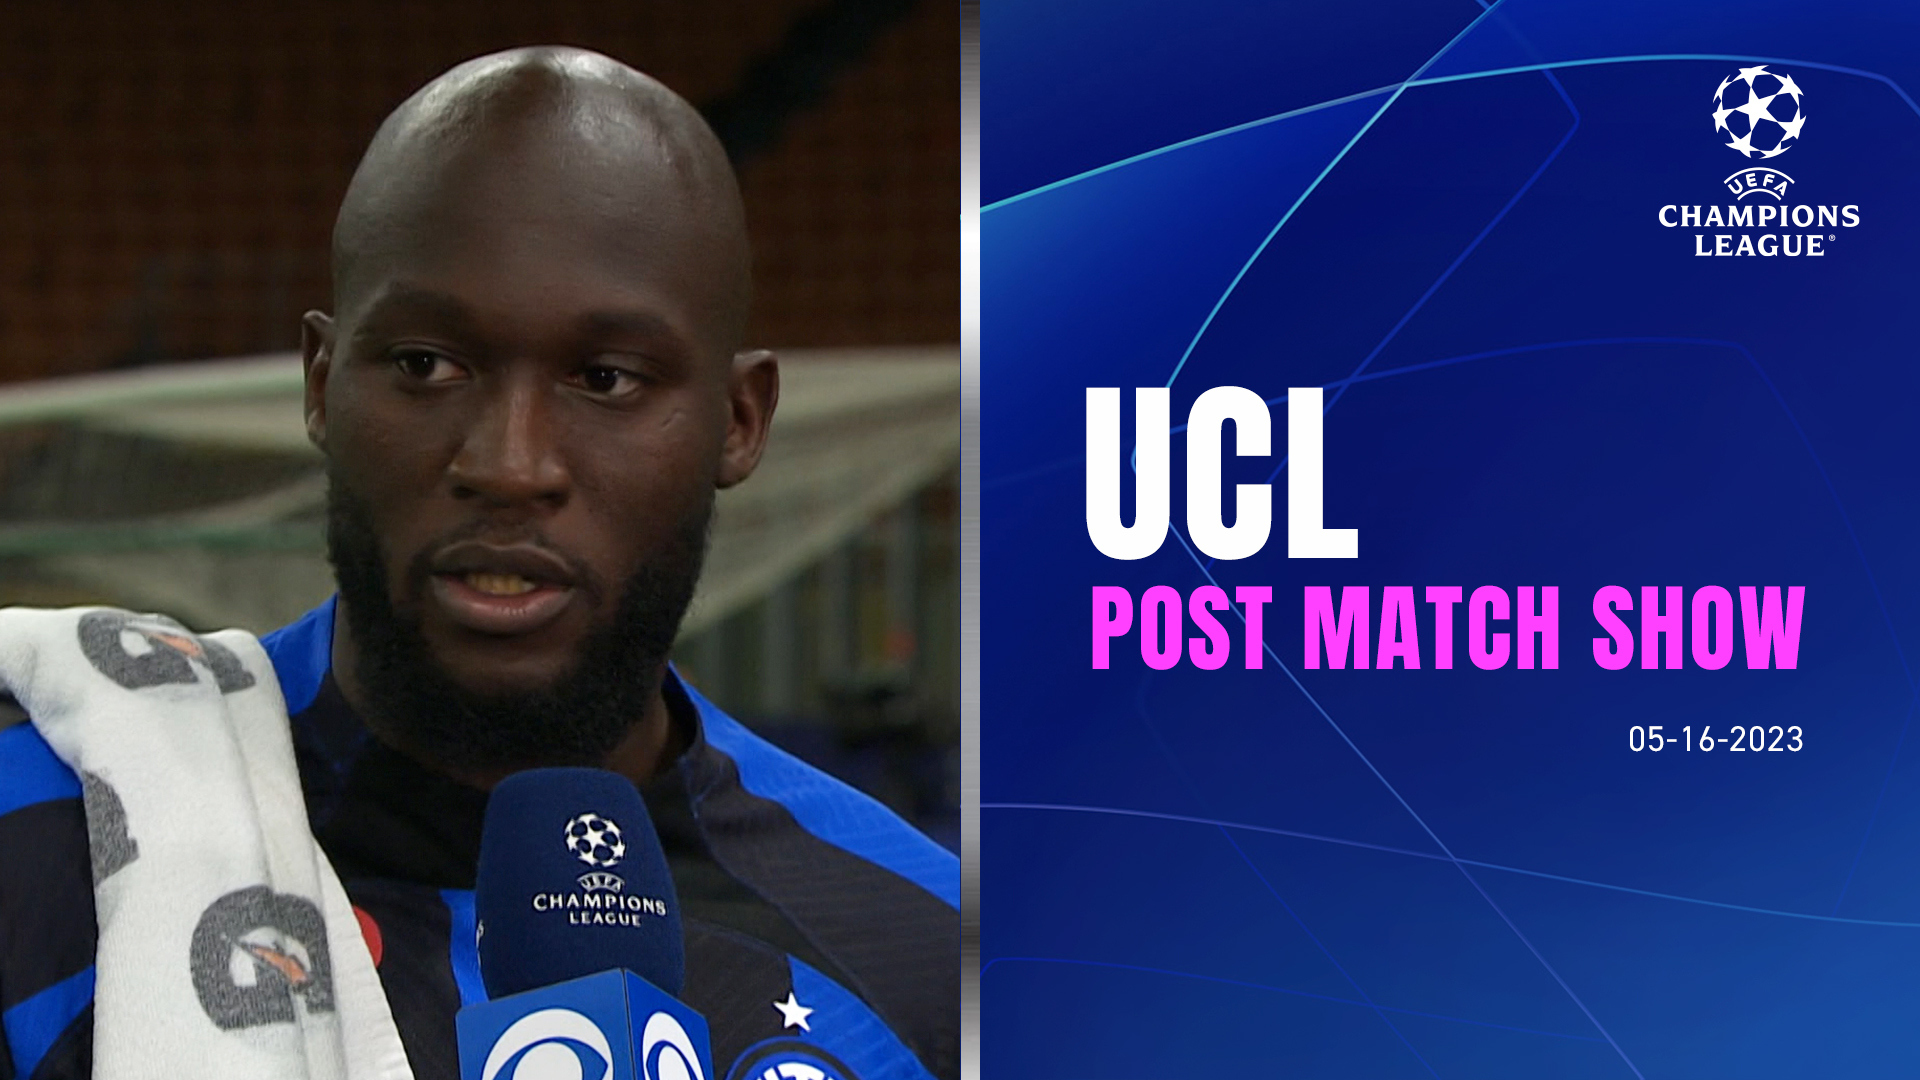 Watch UEFA Champions League Champions League Today Post Match Show - 05/16/23